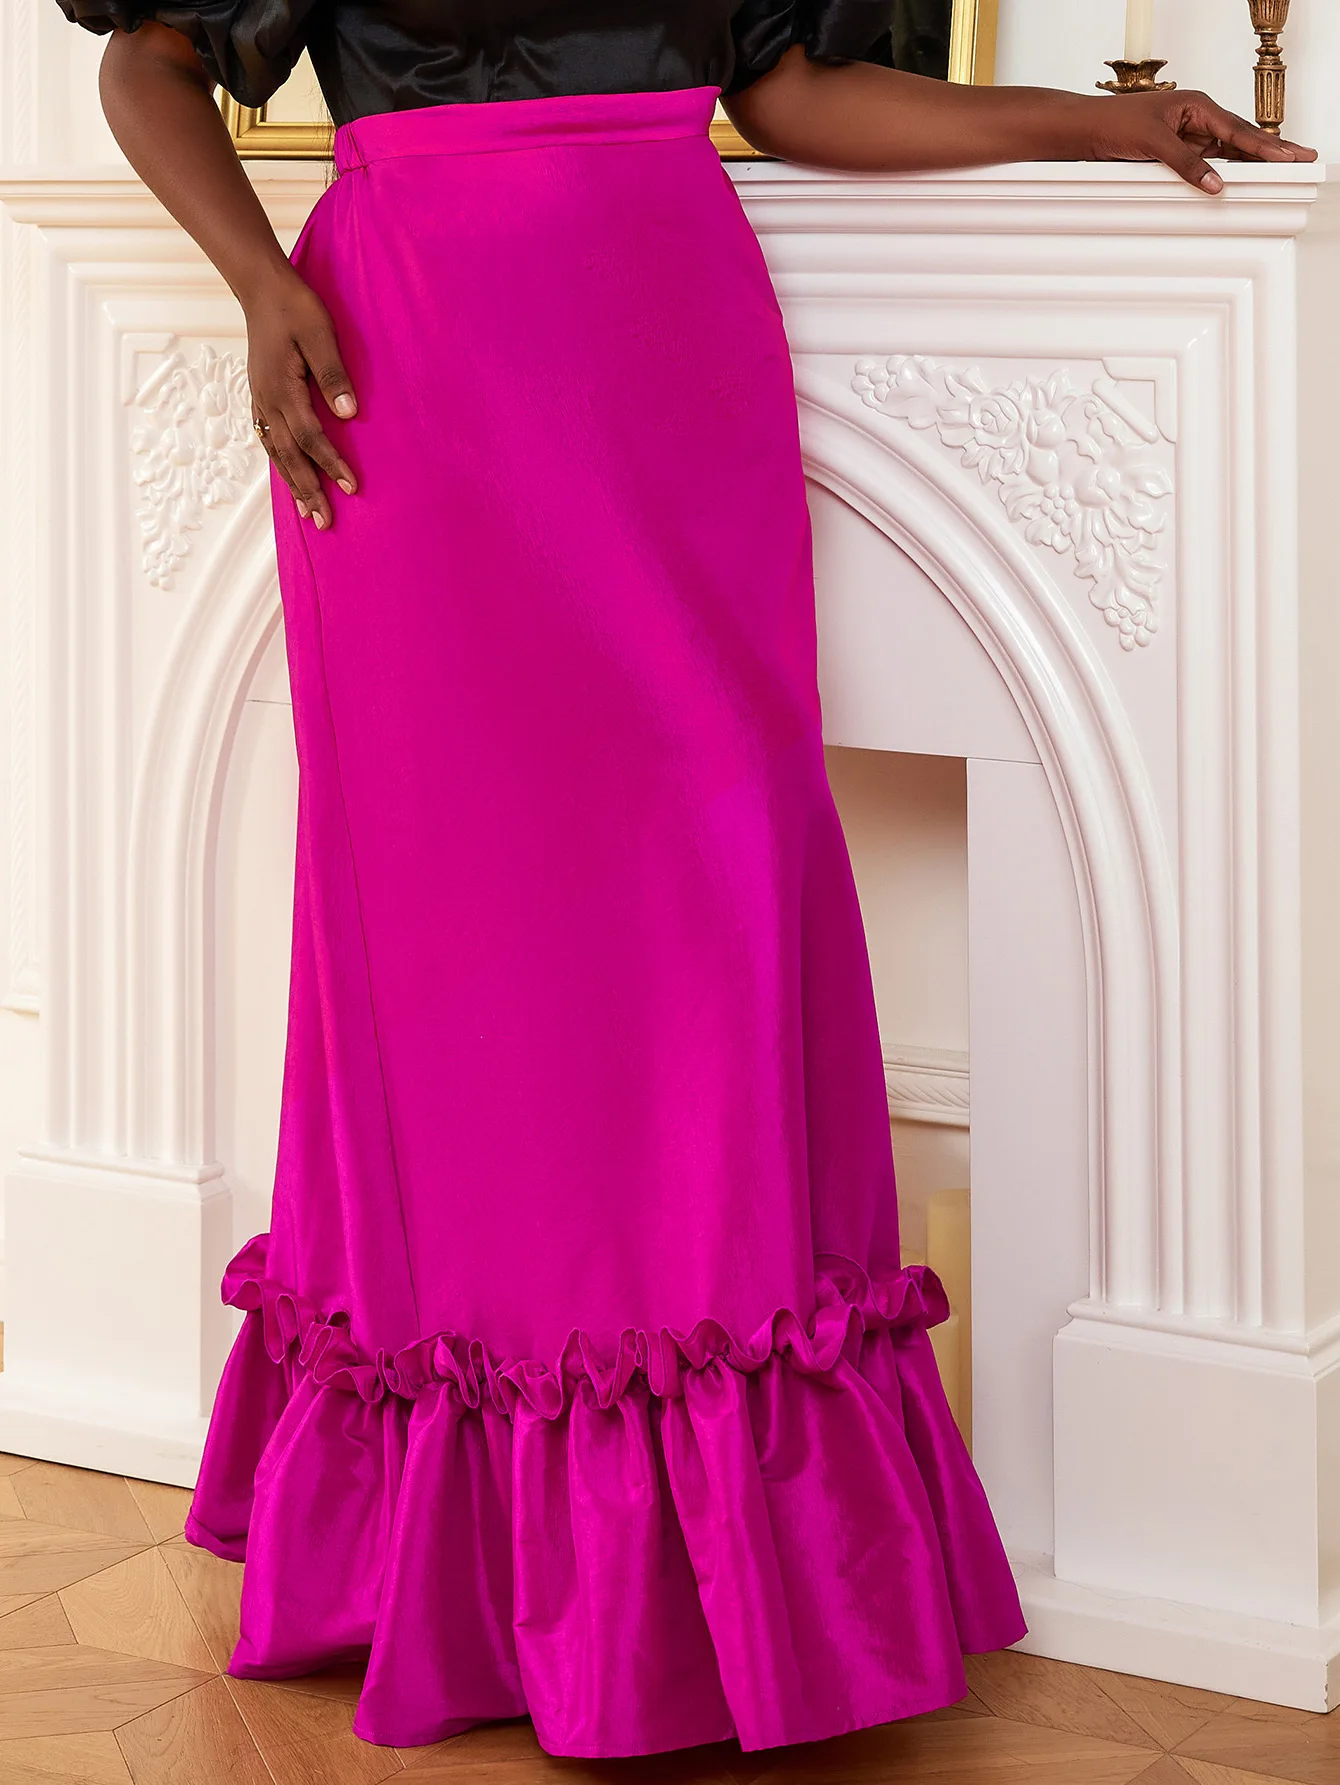 Fuchsia Long Skirts High Waist Shiny Loose Evening Party Cocktail Large Size Ruffles Floor Length Skirt for Ladies 3XL 4XL 2024 charming off the shoulder maternity dresses ruffles pregnant women gown for photoshoot sexy floor length pregnancy babyshower